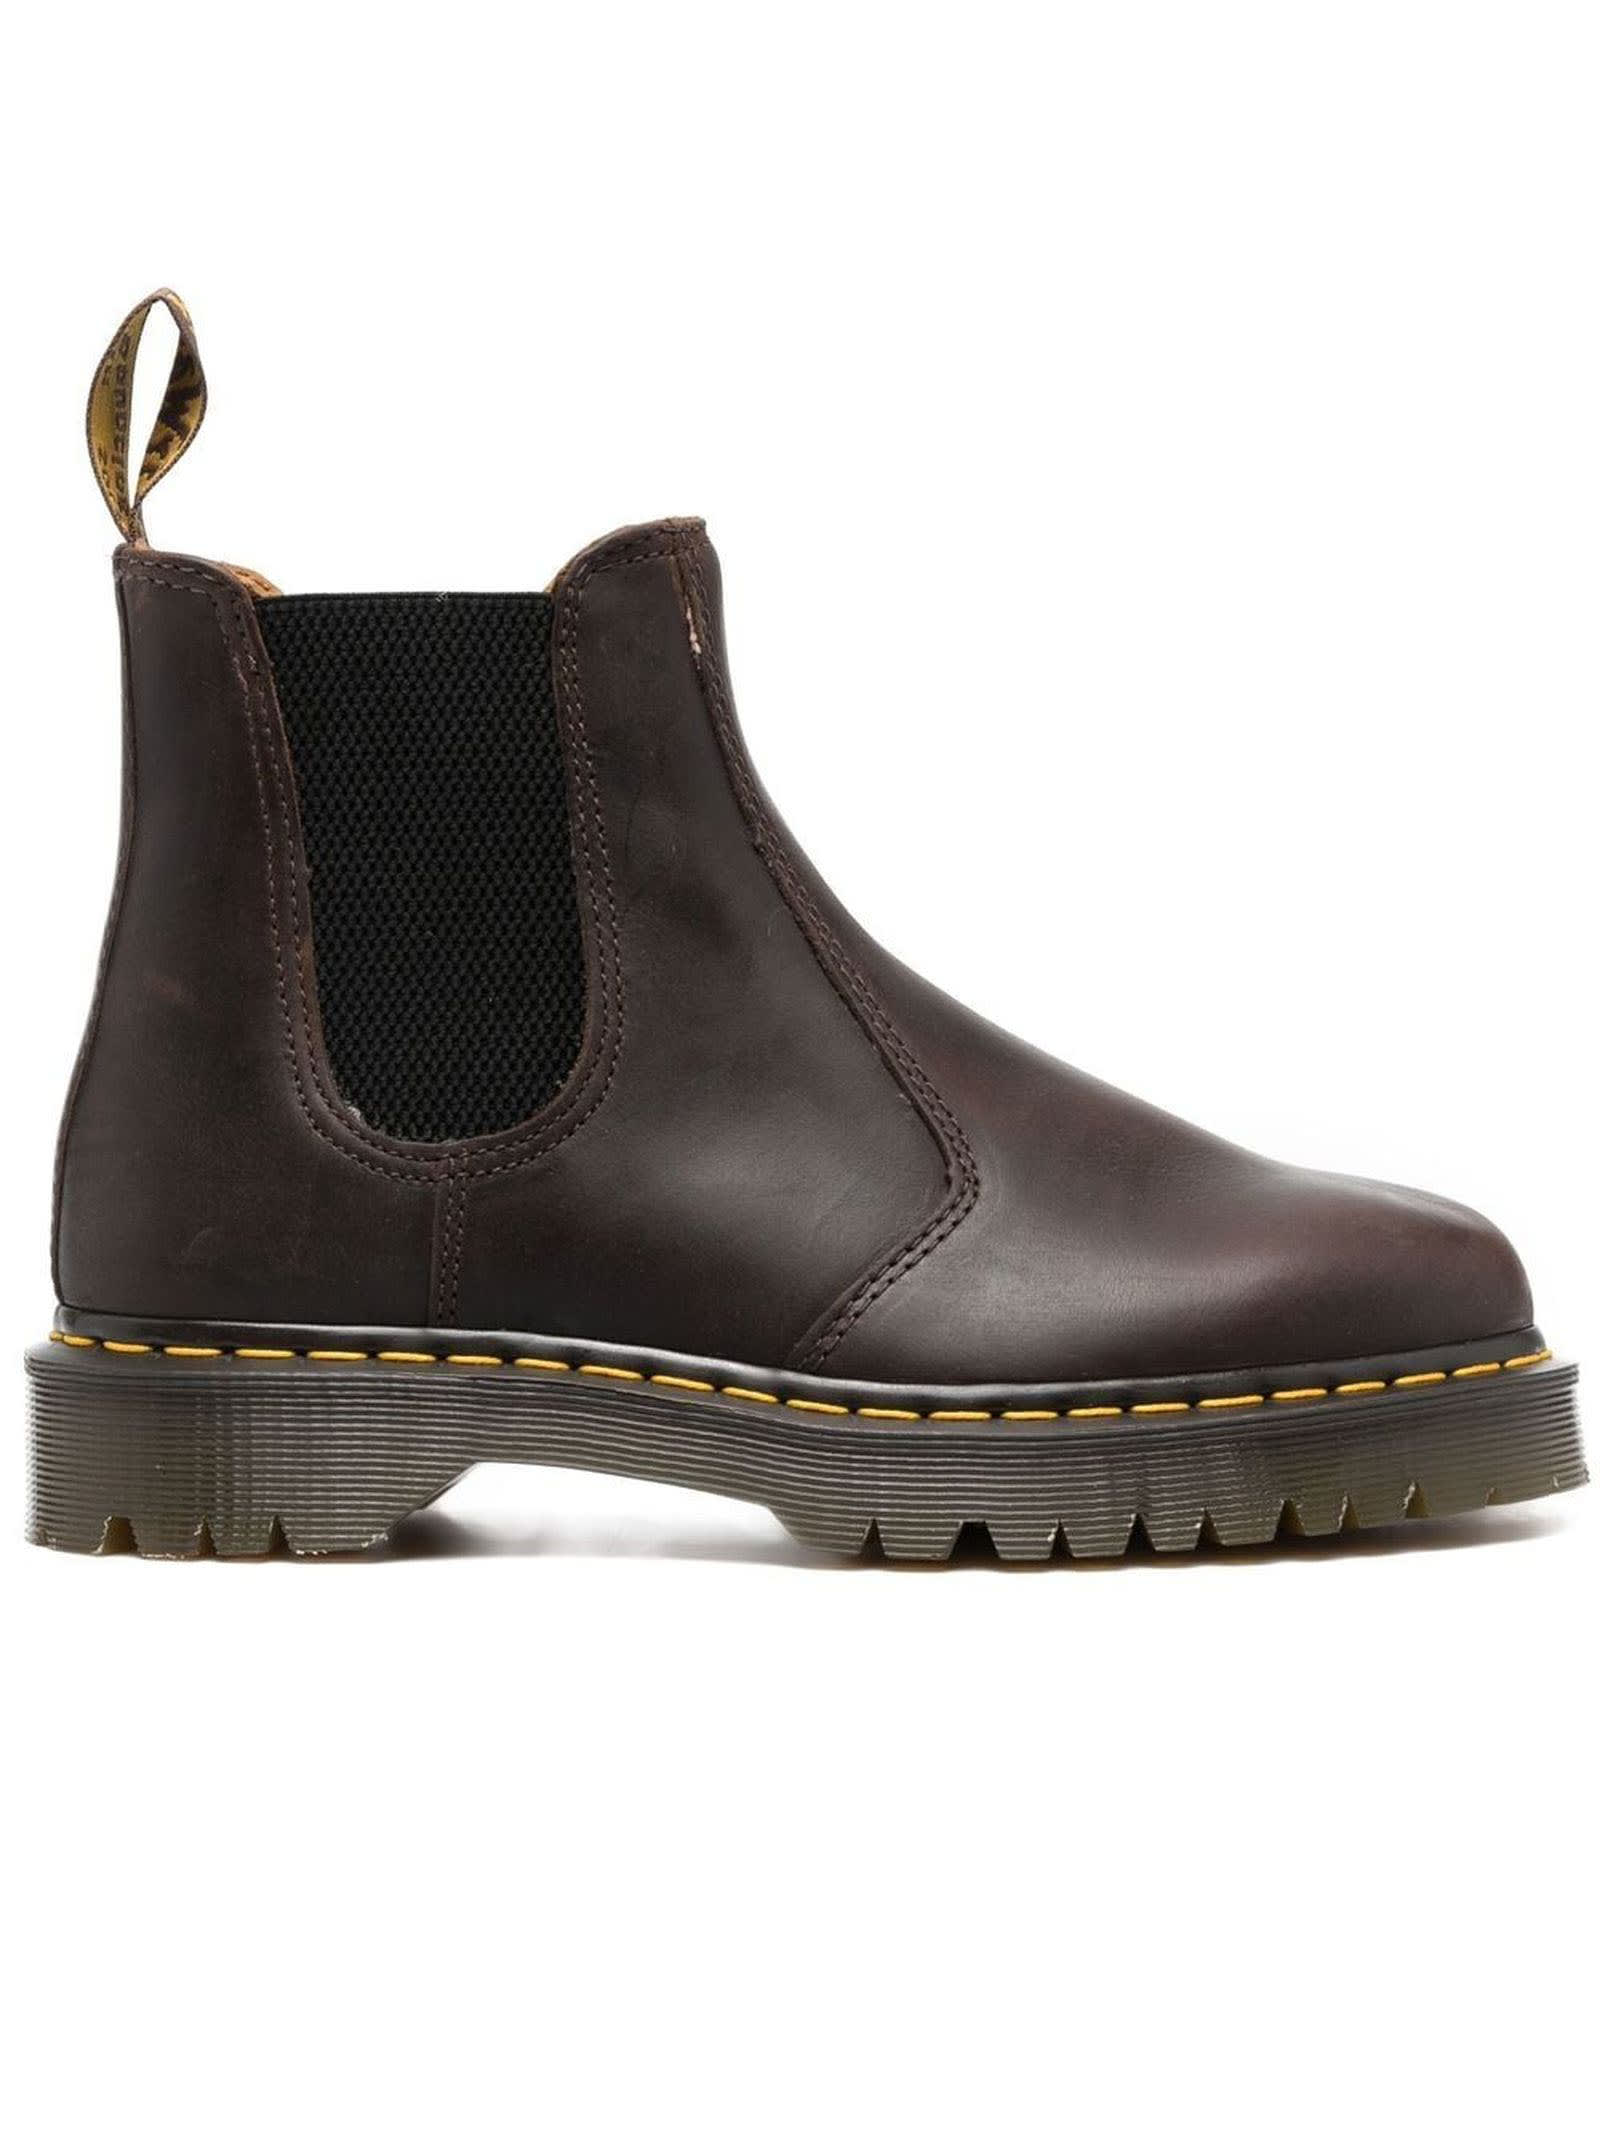 Dr. Martens Brown Calf Leather Ankle Boots